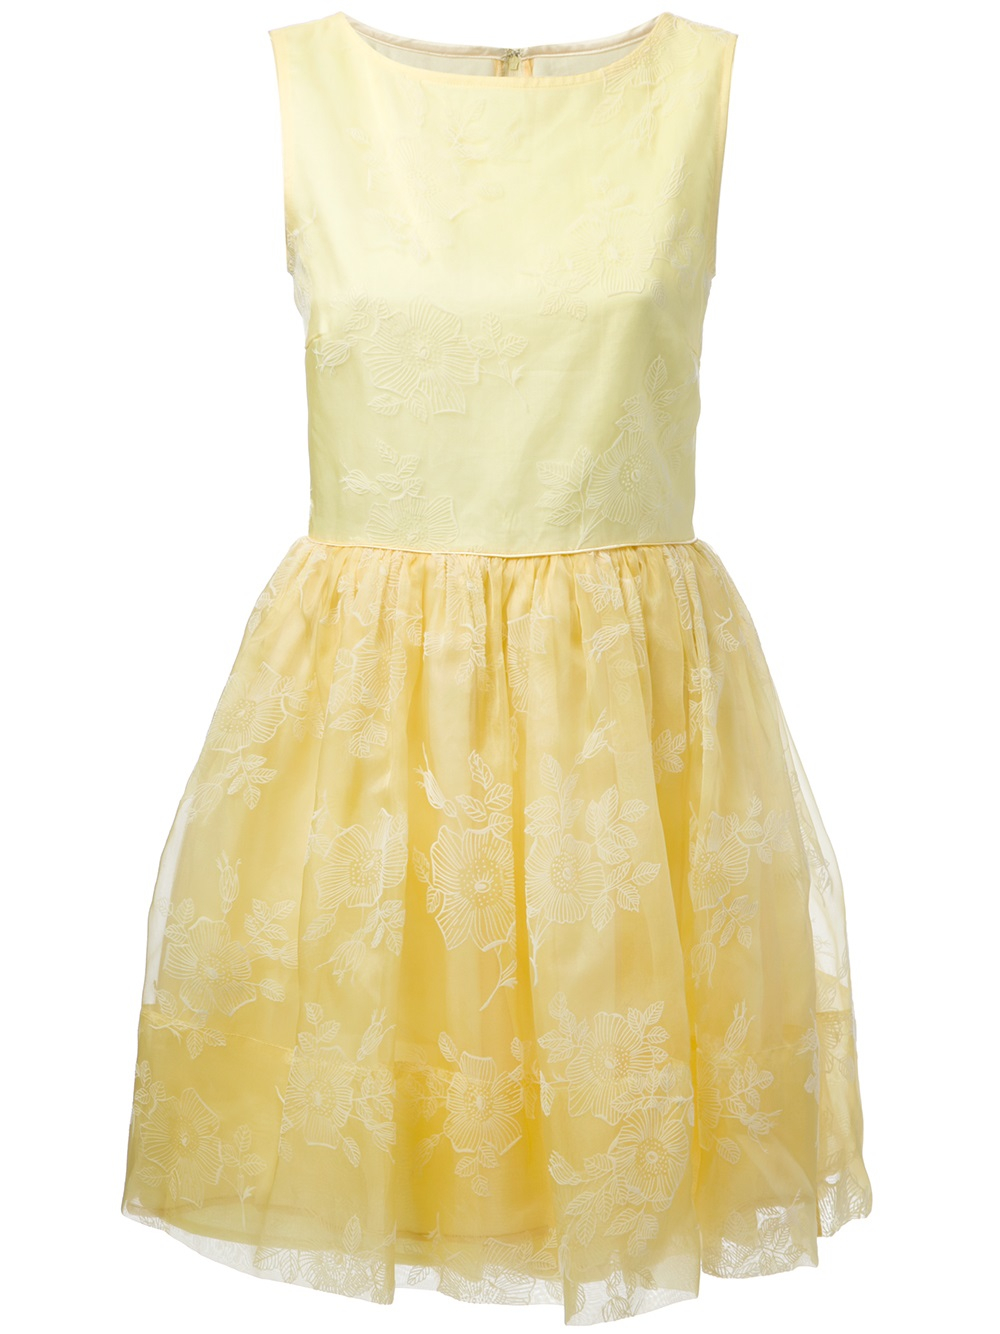 Red Valentino Floral Lace Dress in Yellow (yellow & orange) | Lyst